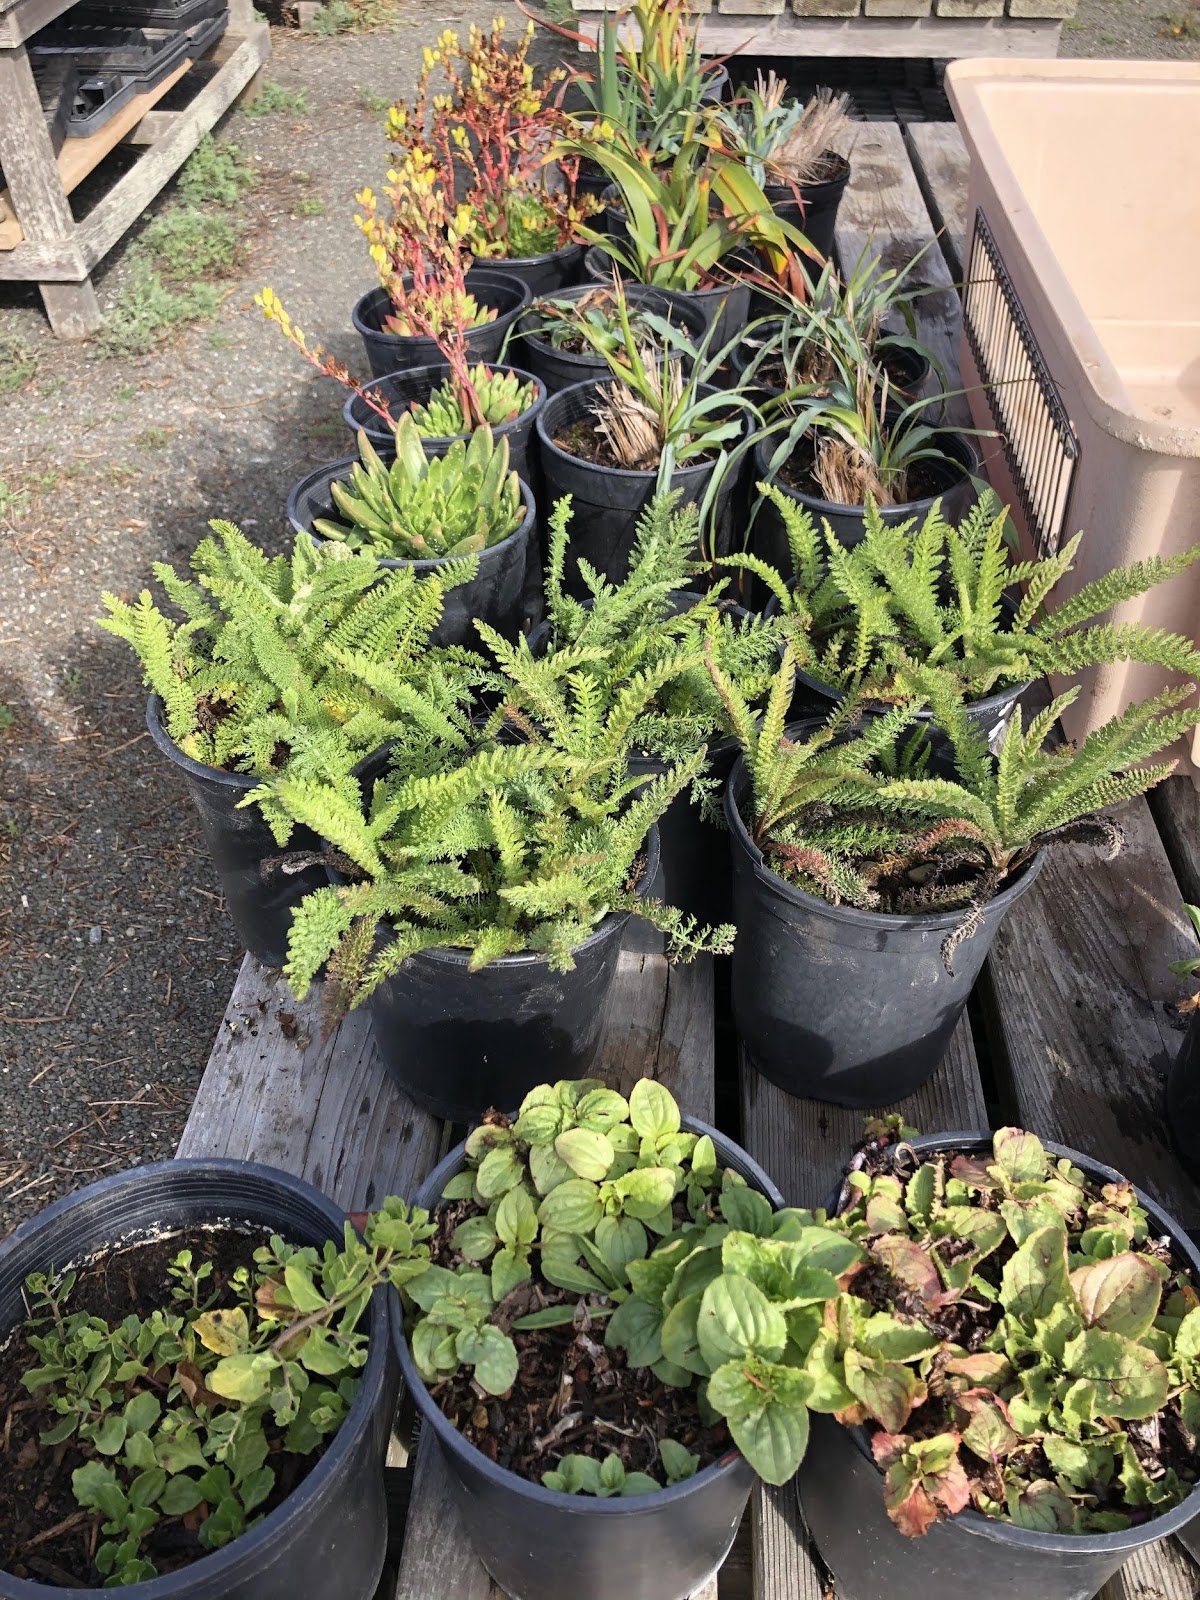 Native Plants For Restoration Project In Half Moon Bay